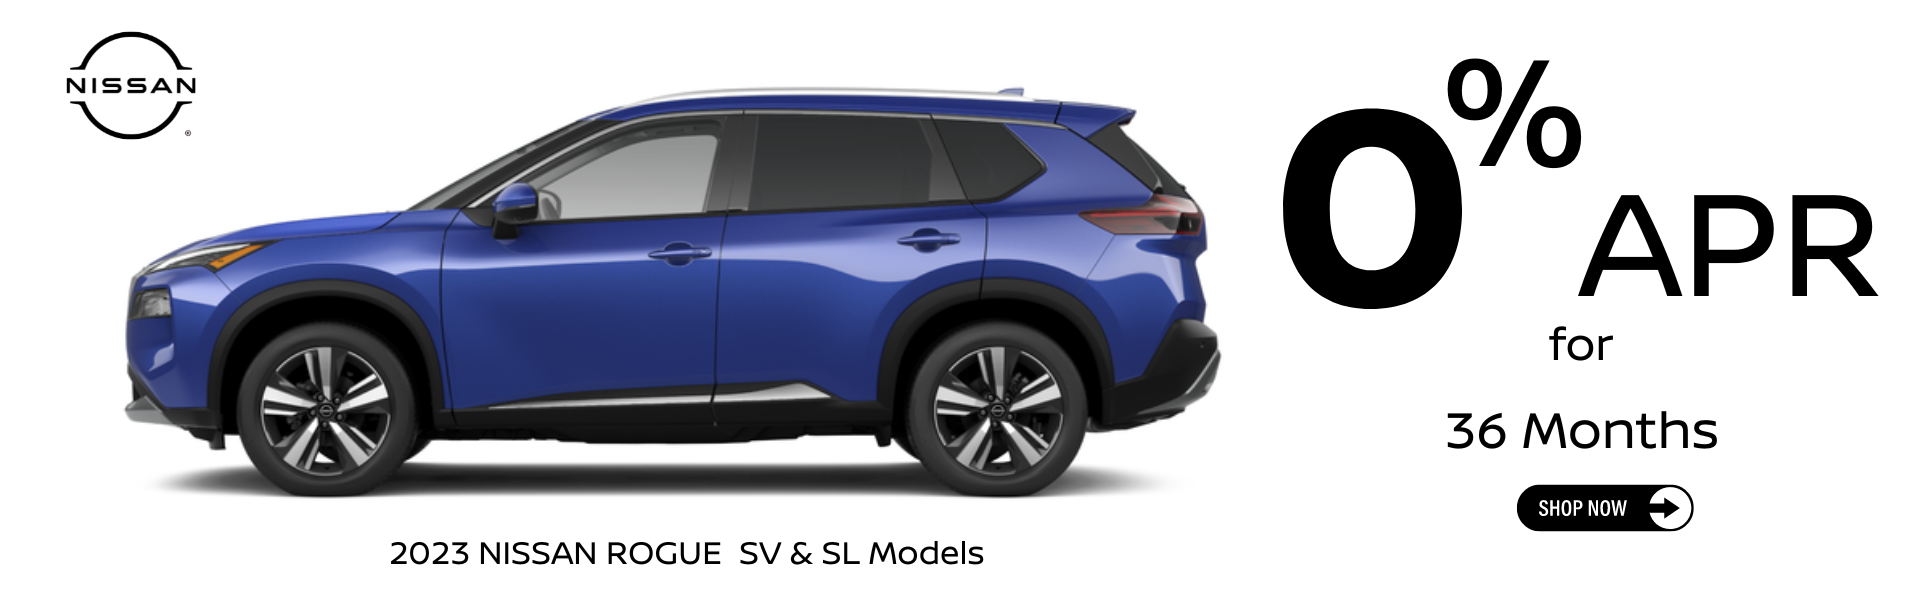 2023 Nissan Rogue in Blue 0% APR for 36 months Special